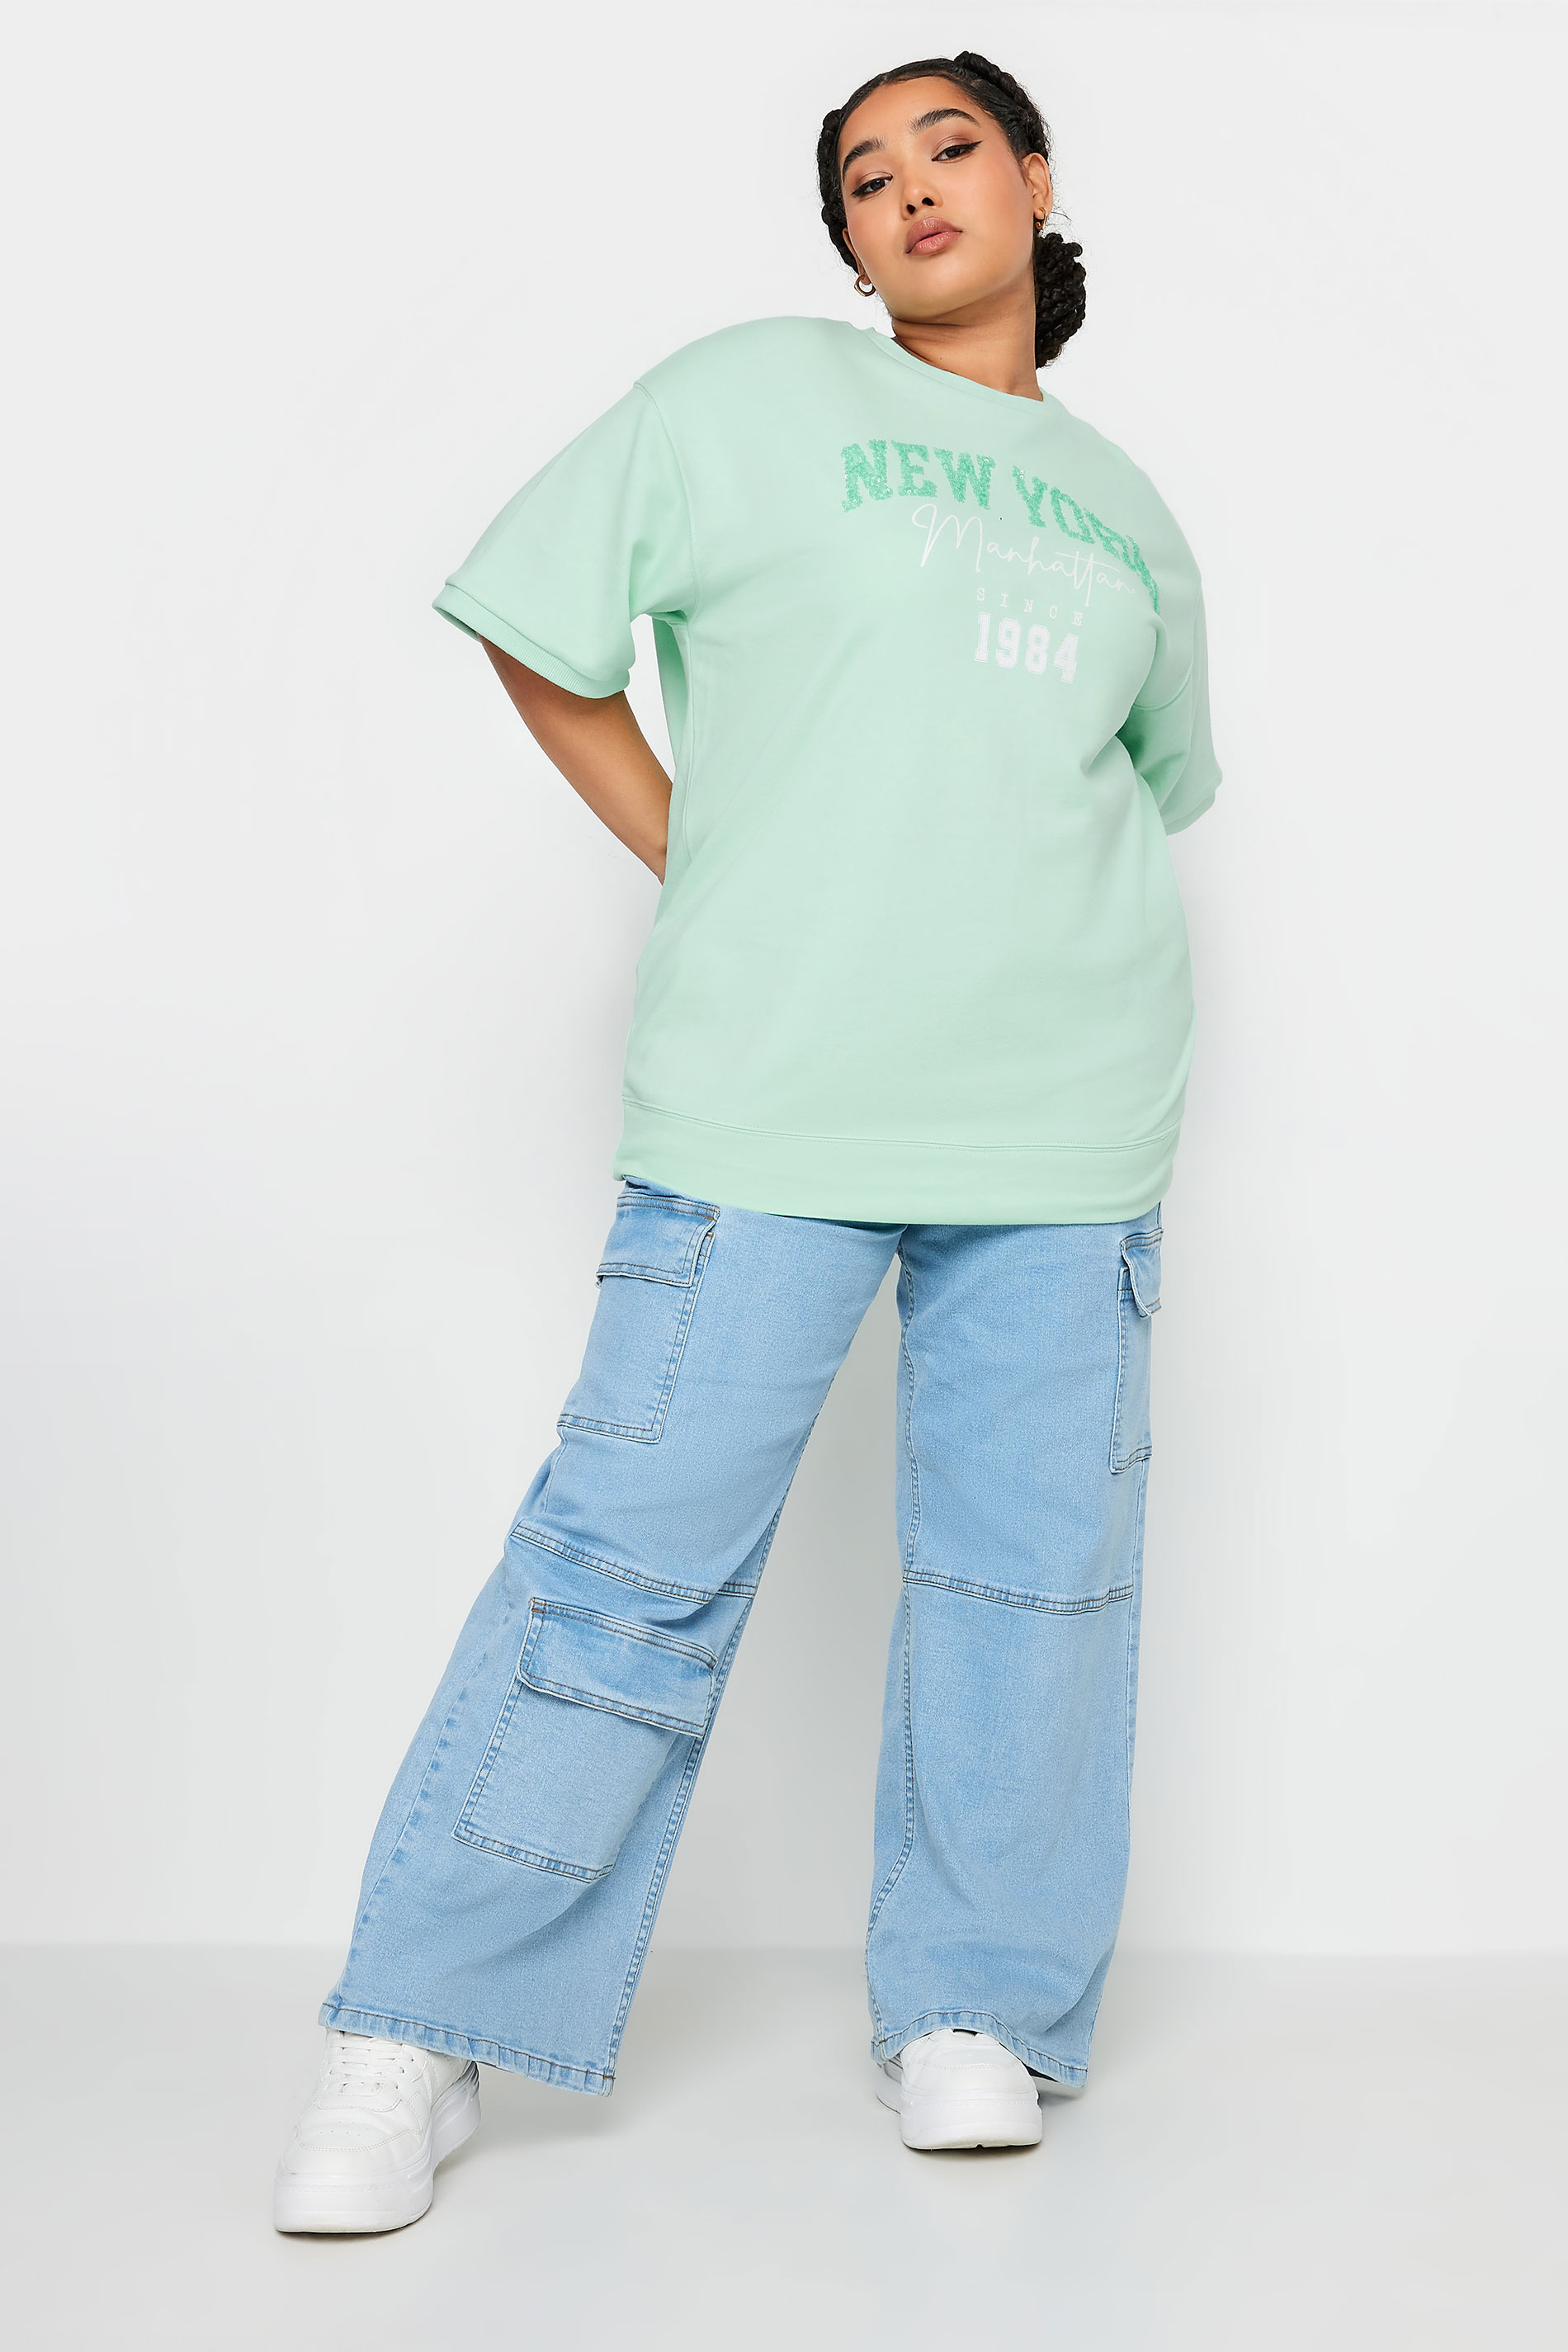 YOURS Plus Size Green 'New York' Slogan Embellished Top | Yours Clothing 2